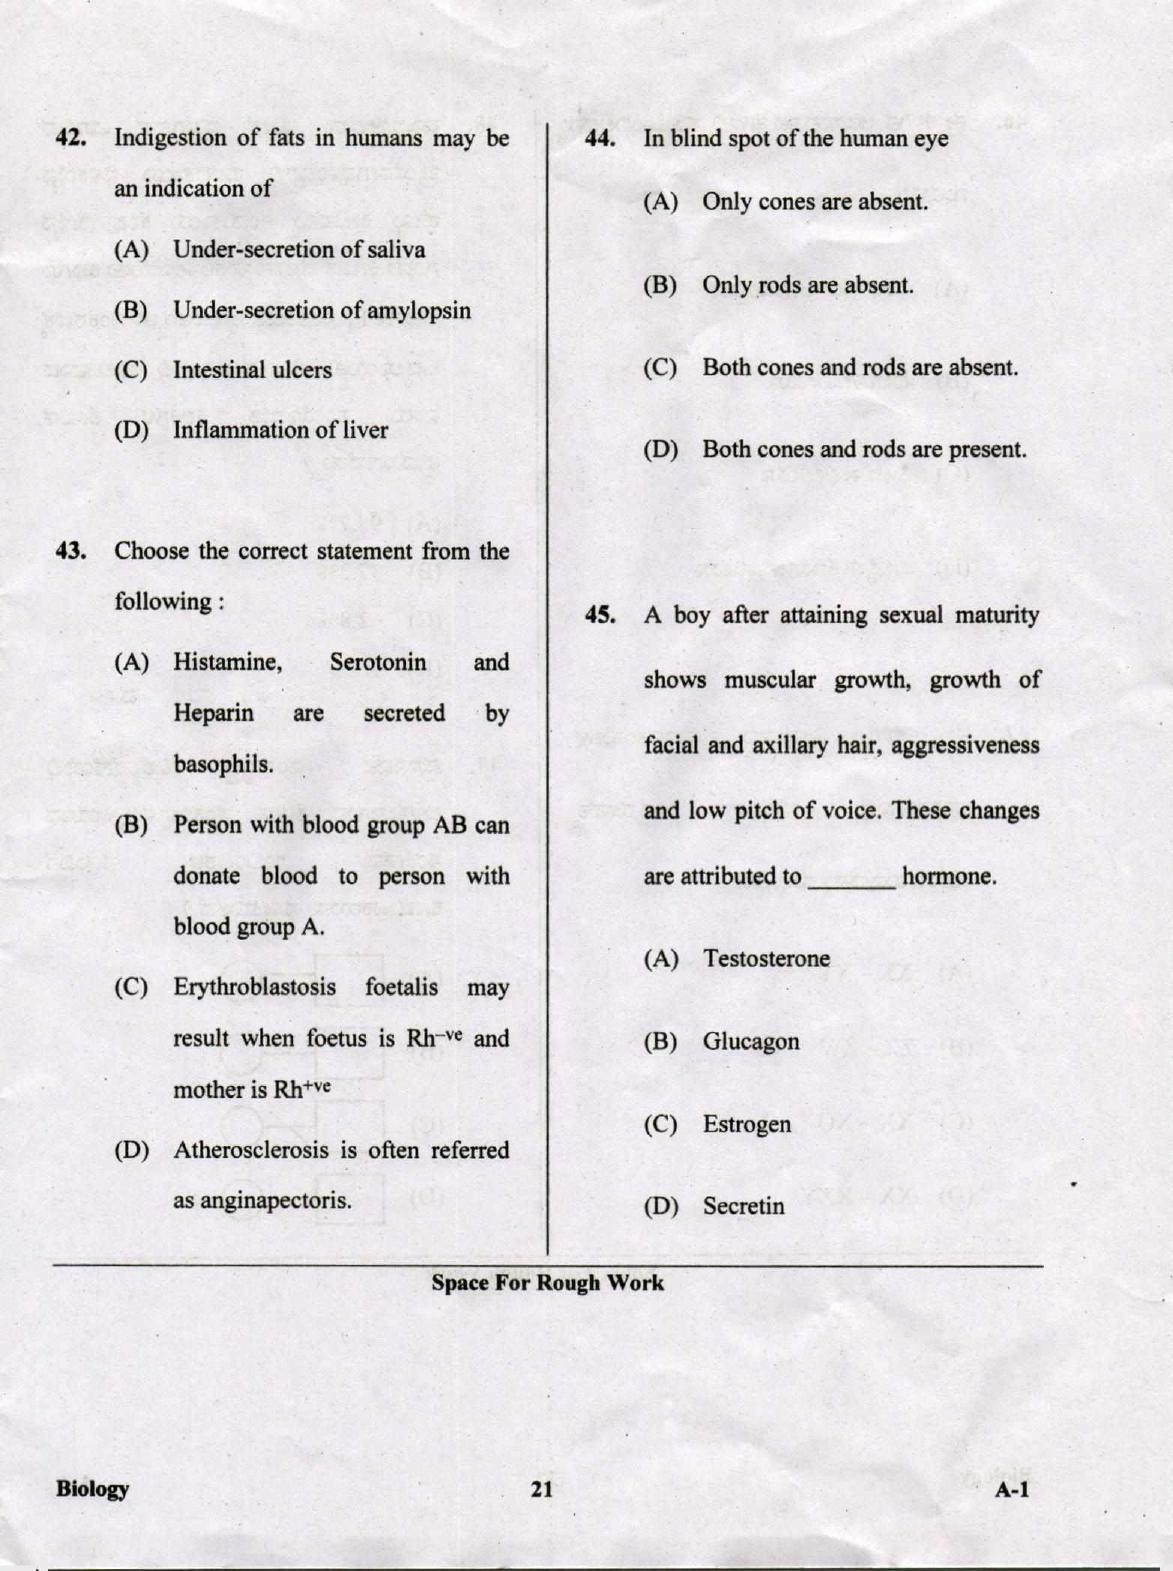 KCET Biology 2019 Question Papers - Page 21